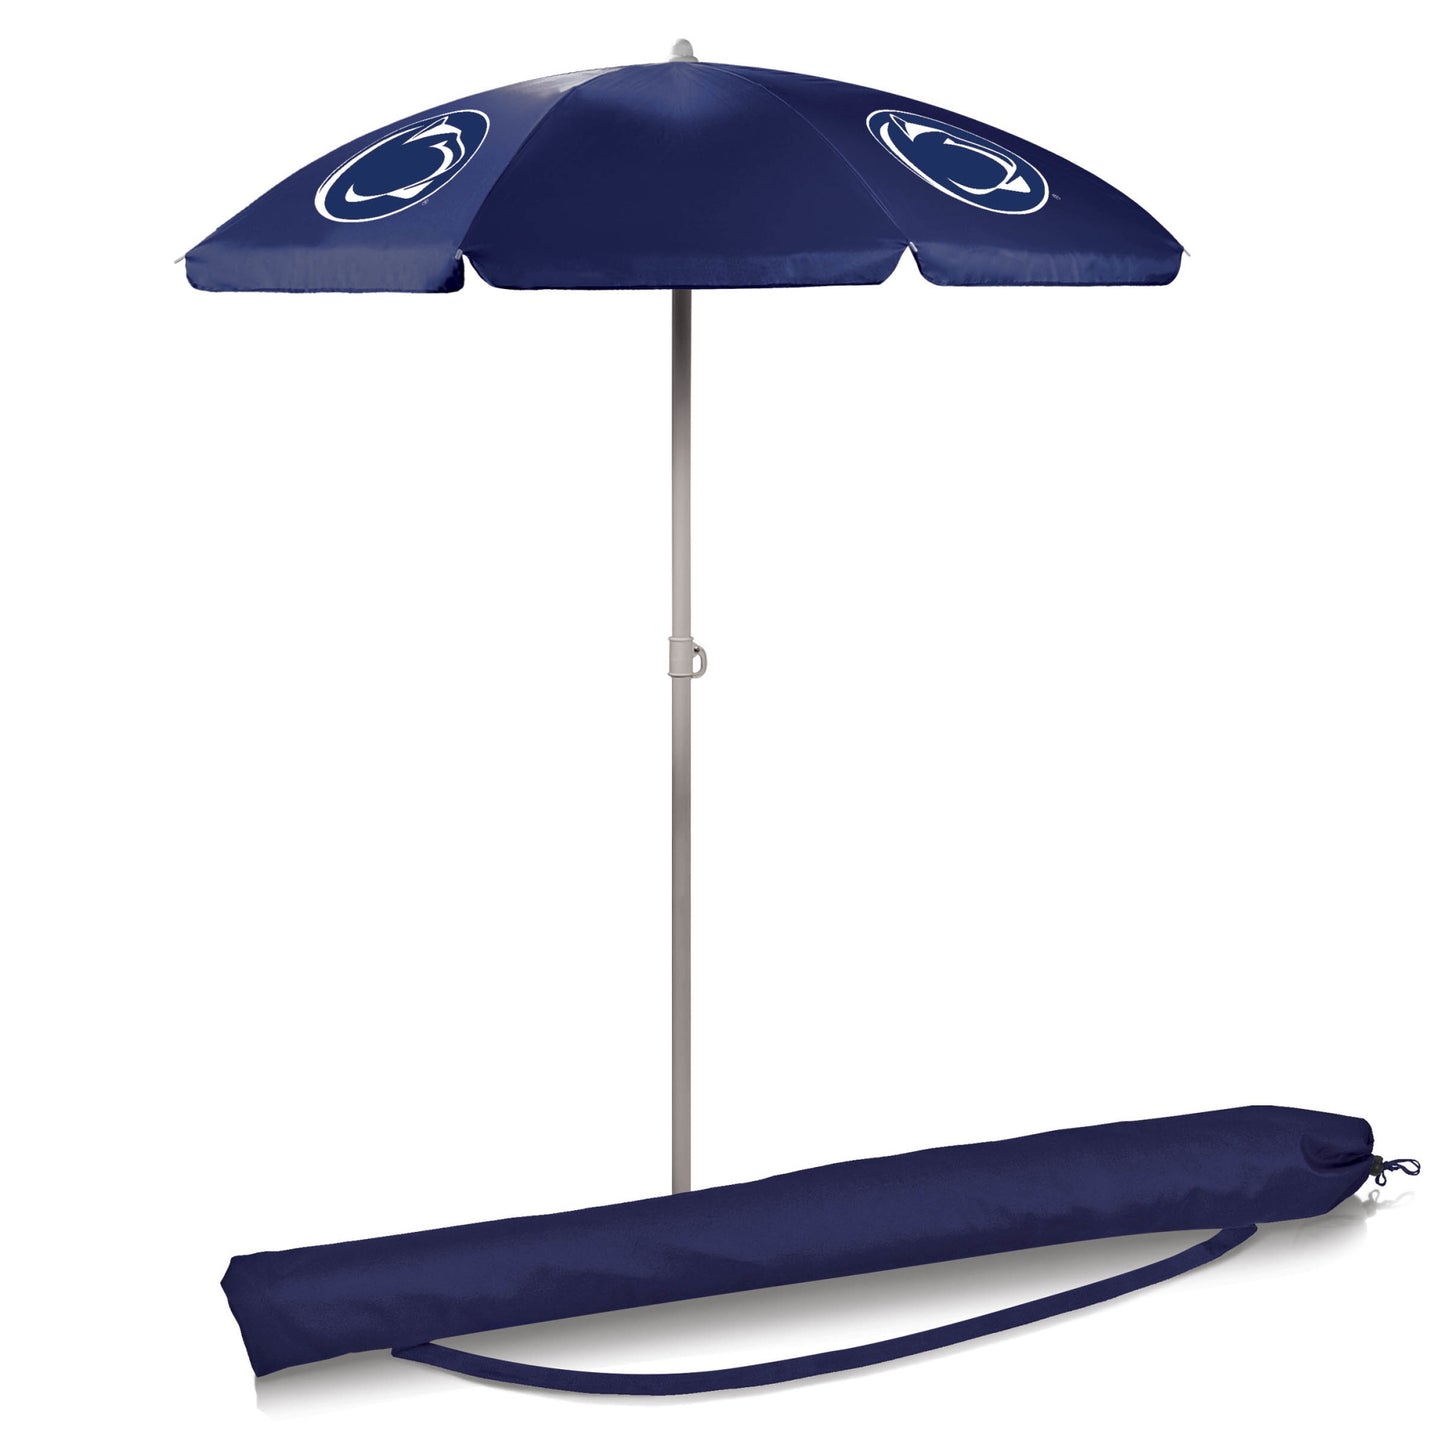 Penn State {PSU} Nittany Lions 5.5' Portable Beach Umbrella by Picnic Time